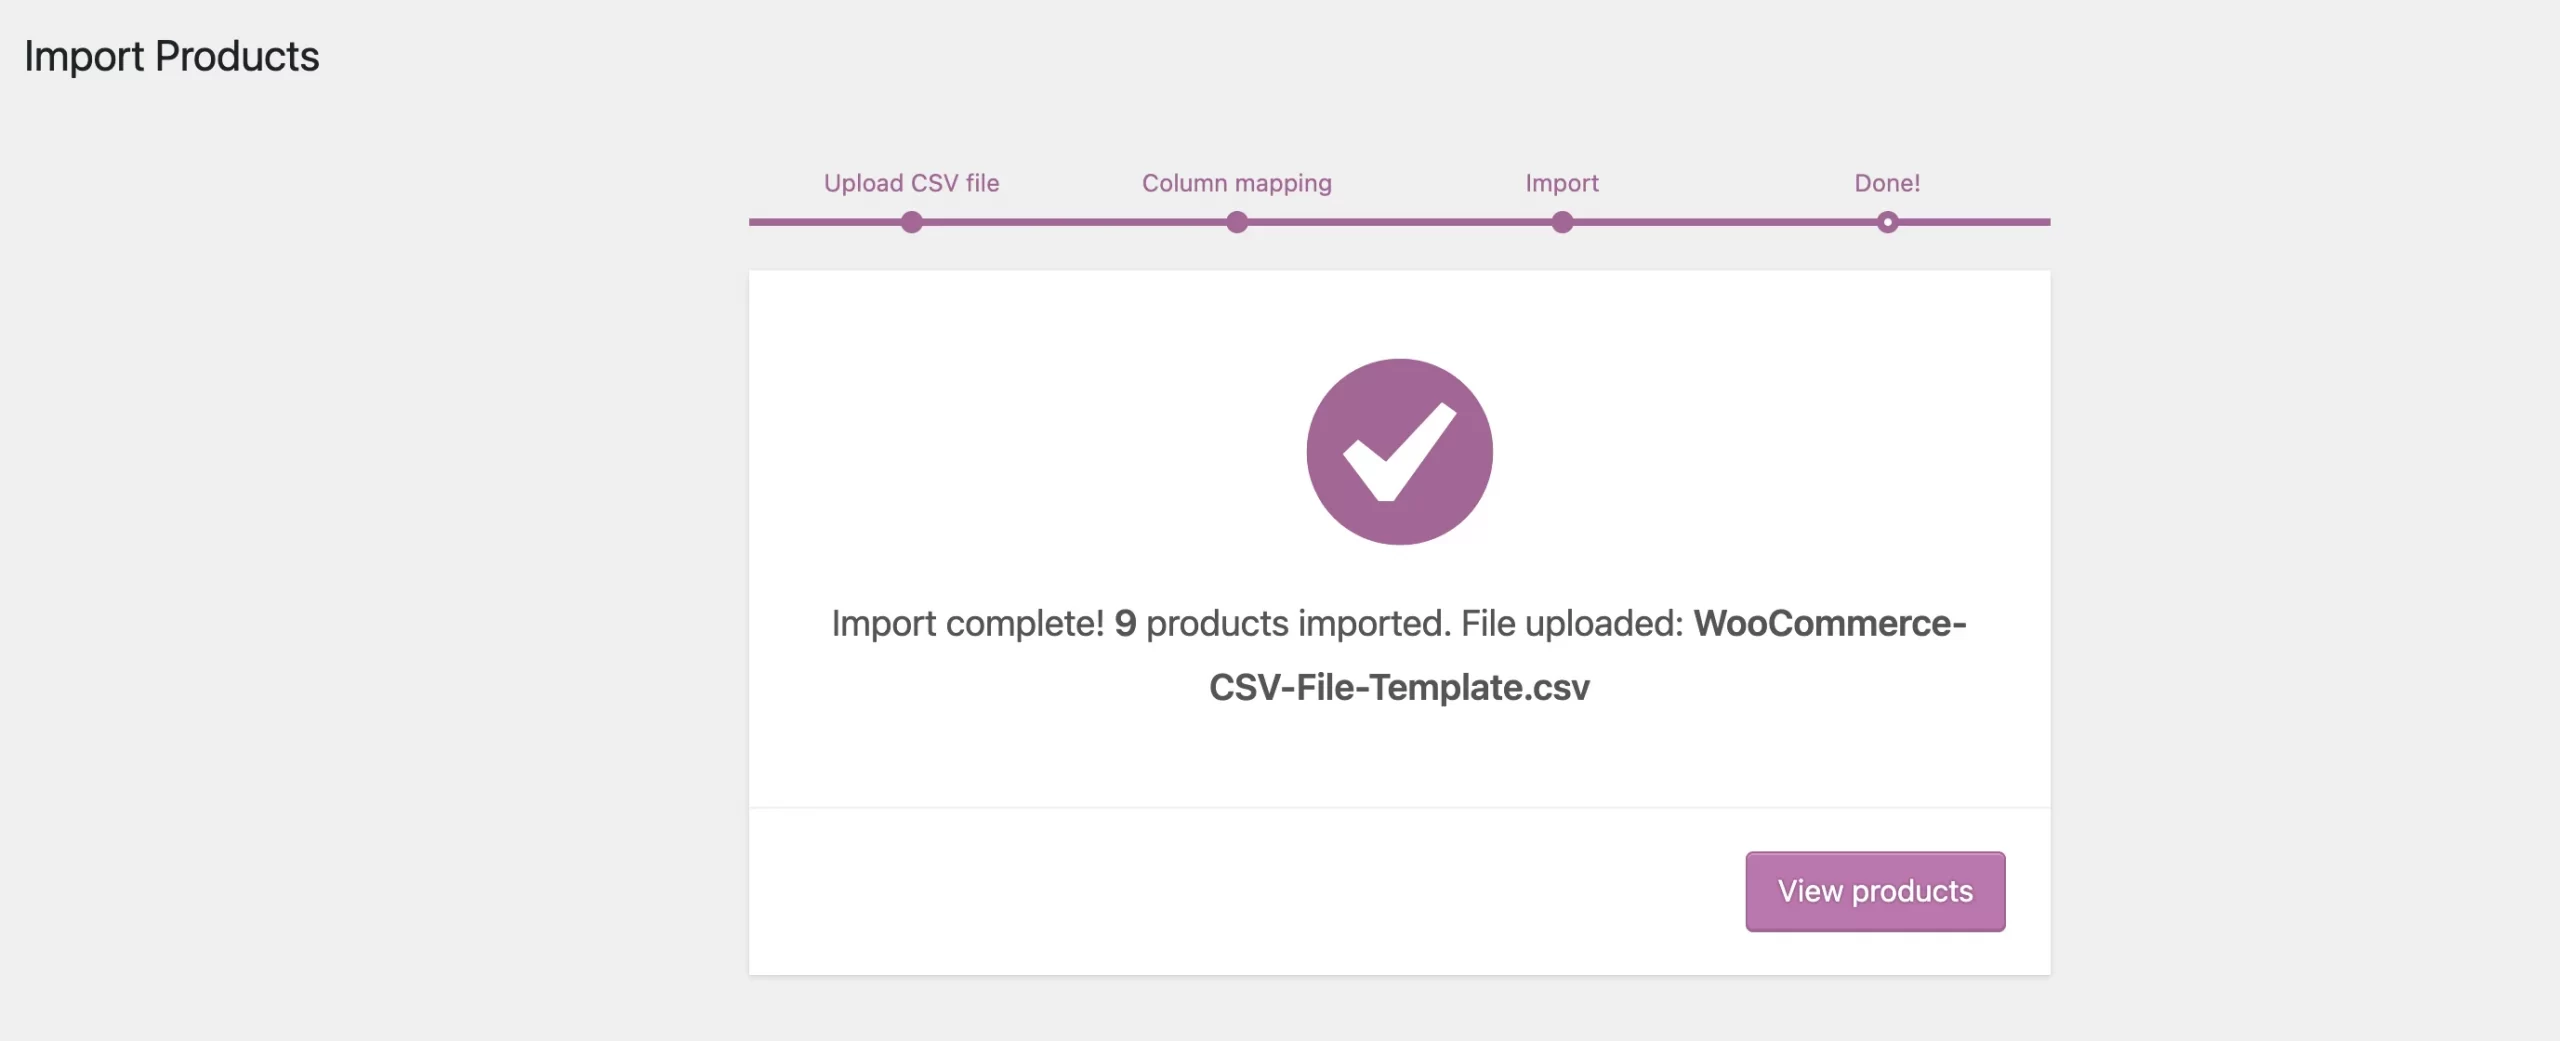 WooCommerce CSV import successfully